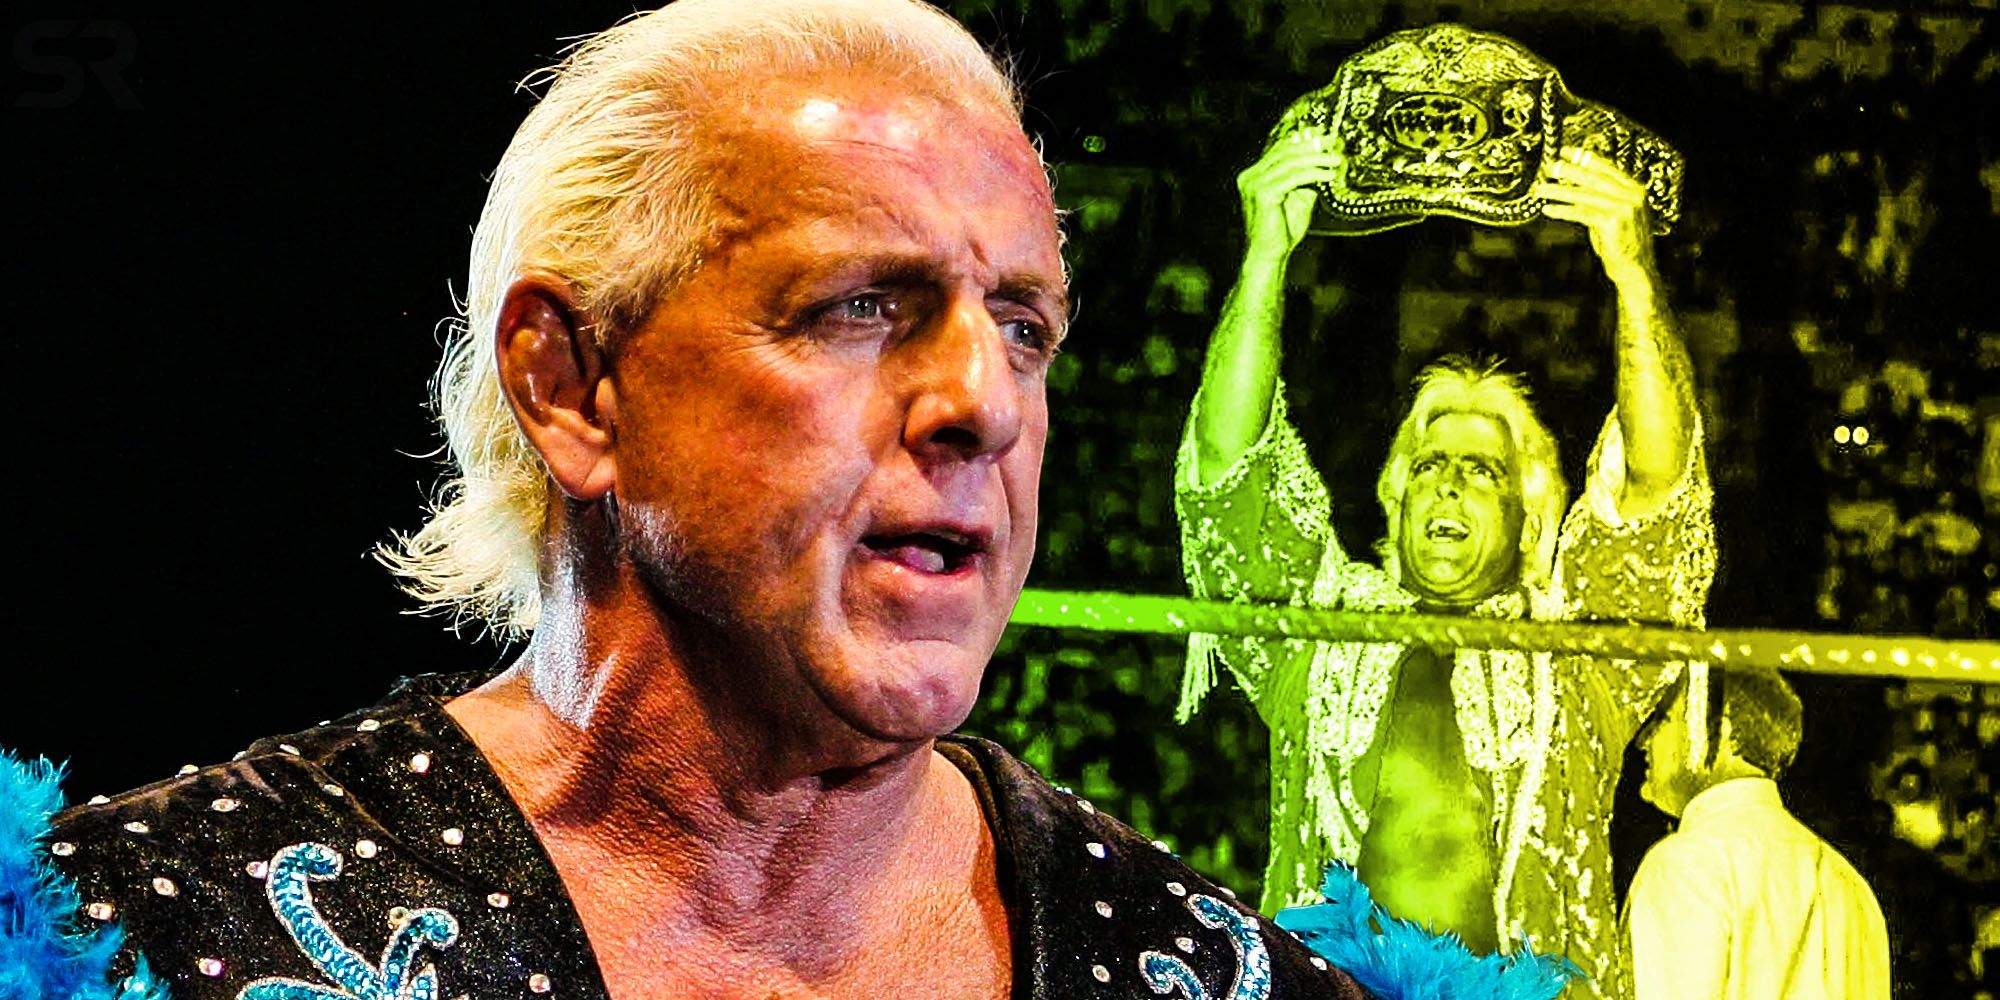 Ric Flair really a 21 time world champion WWE